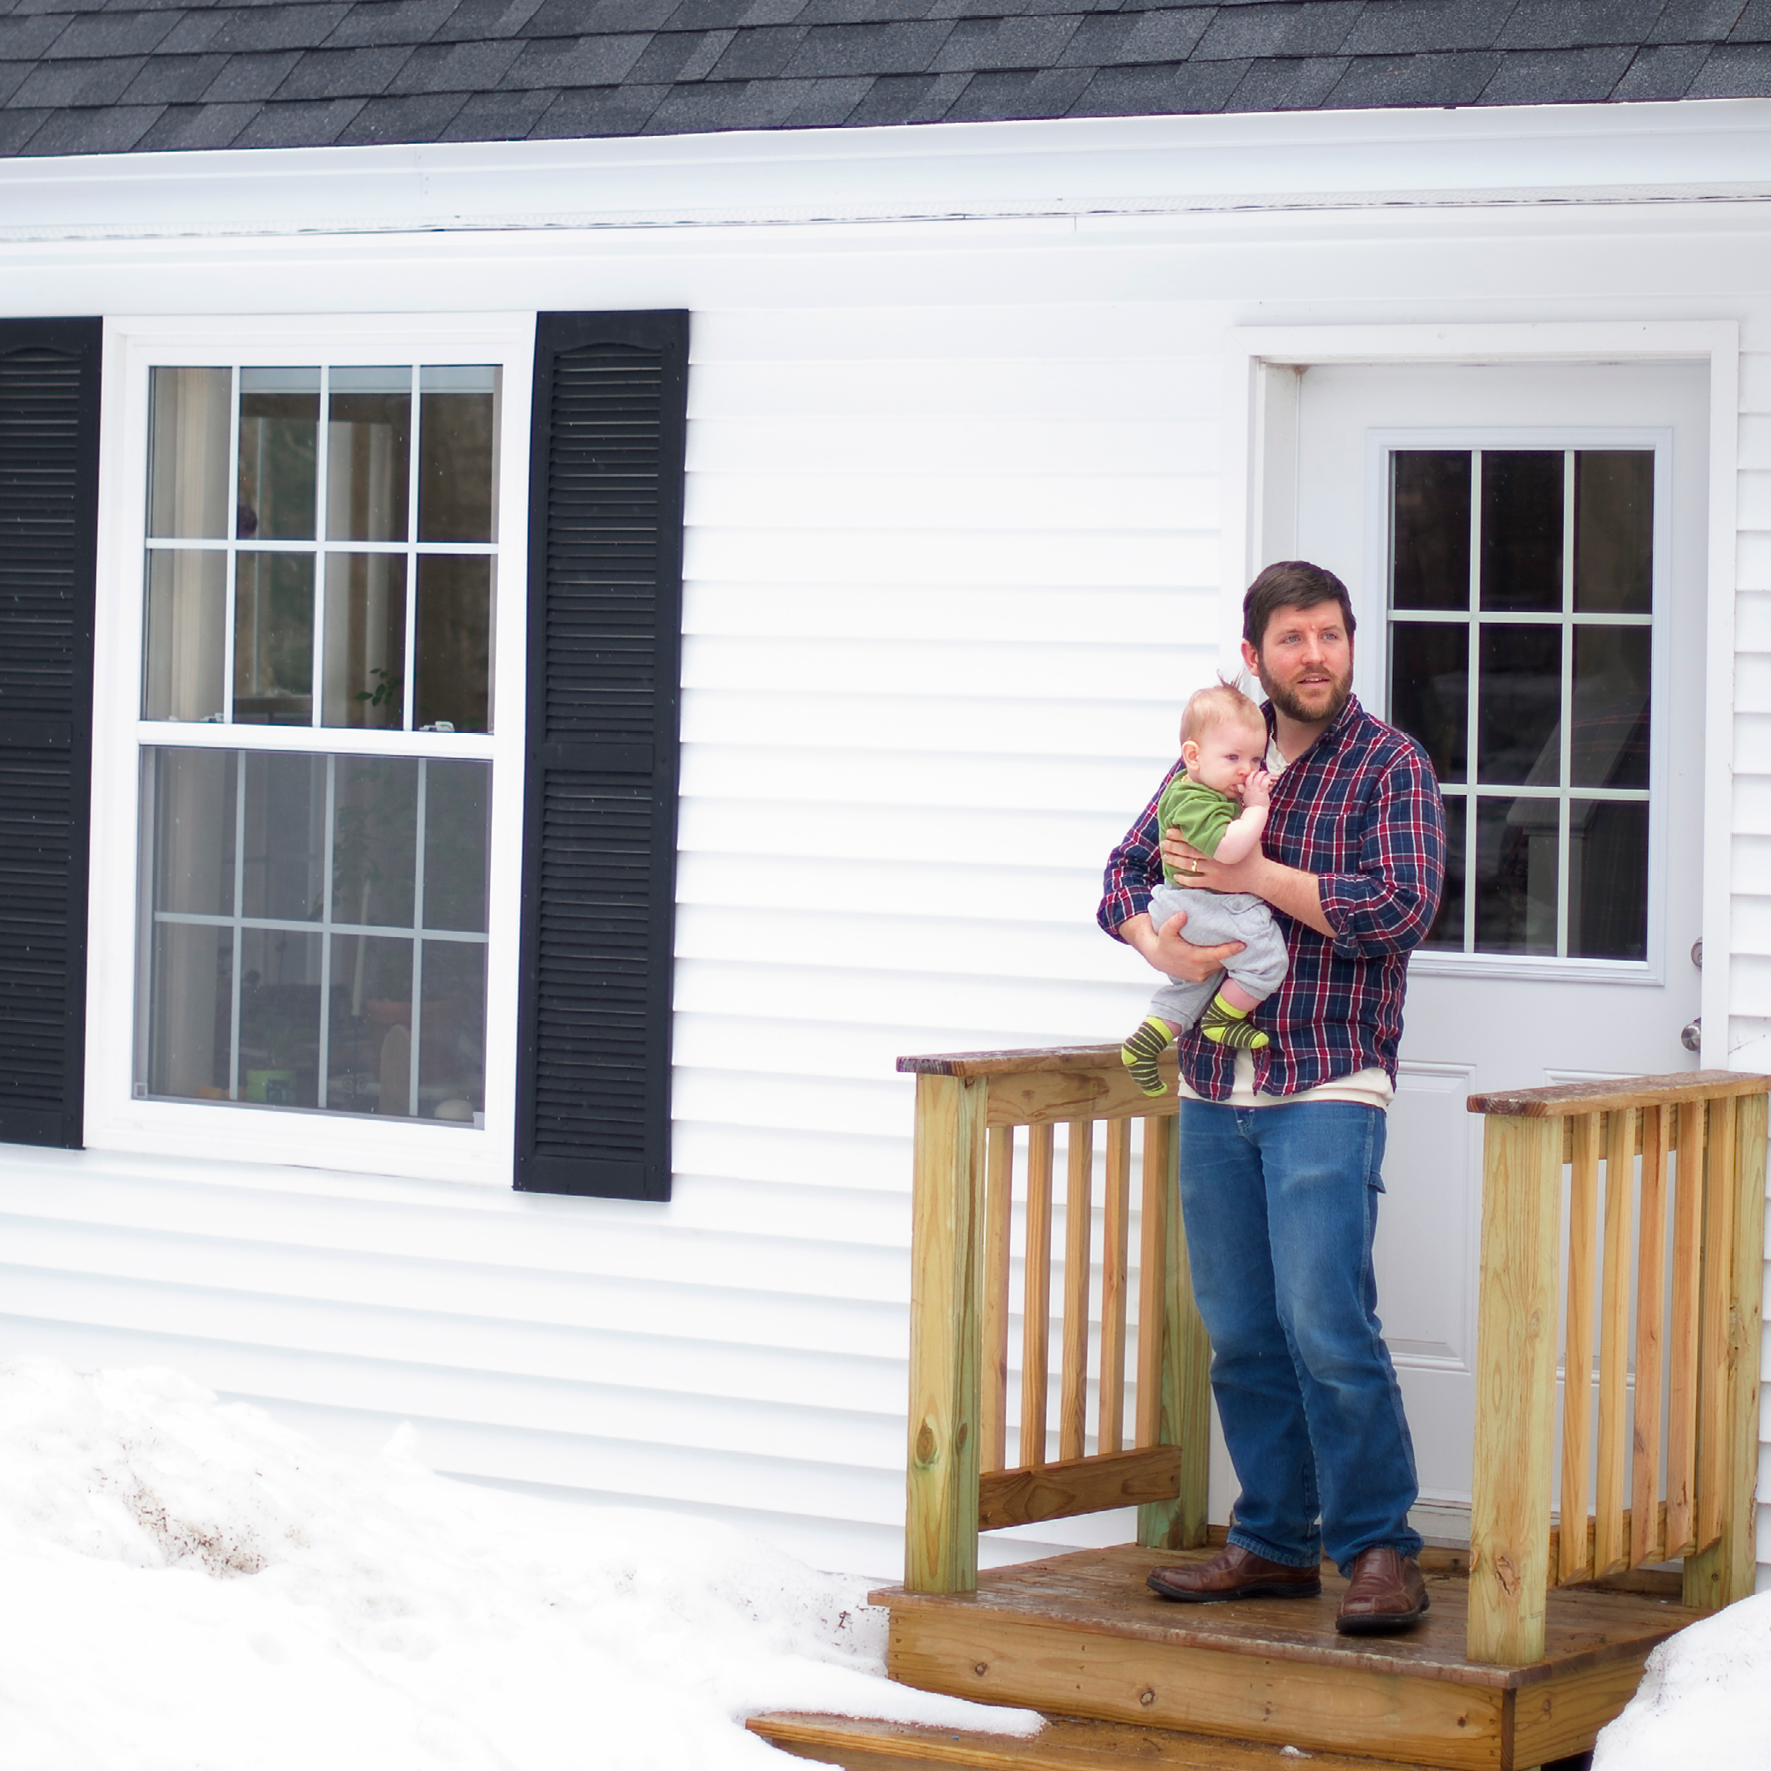 A father and his young child stand proudly on the front steps of their newly constructed home on the island of Islesboro, Maine, built as part of a multi-year Genesis Fund initiative to help Maine island communities develop affordable year-round housing.